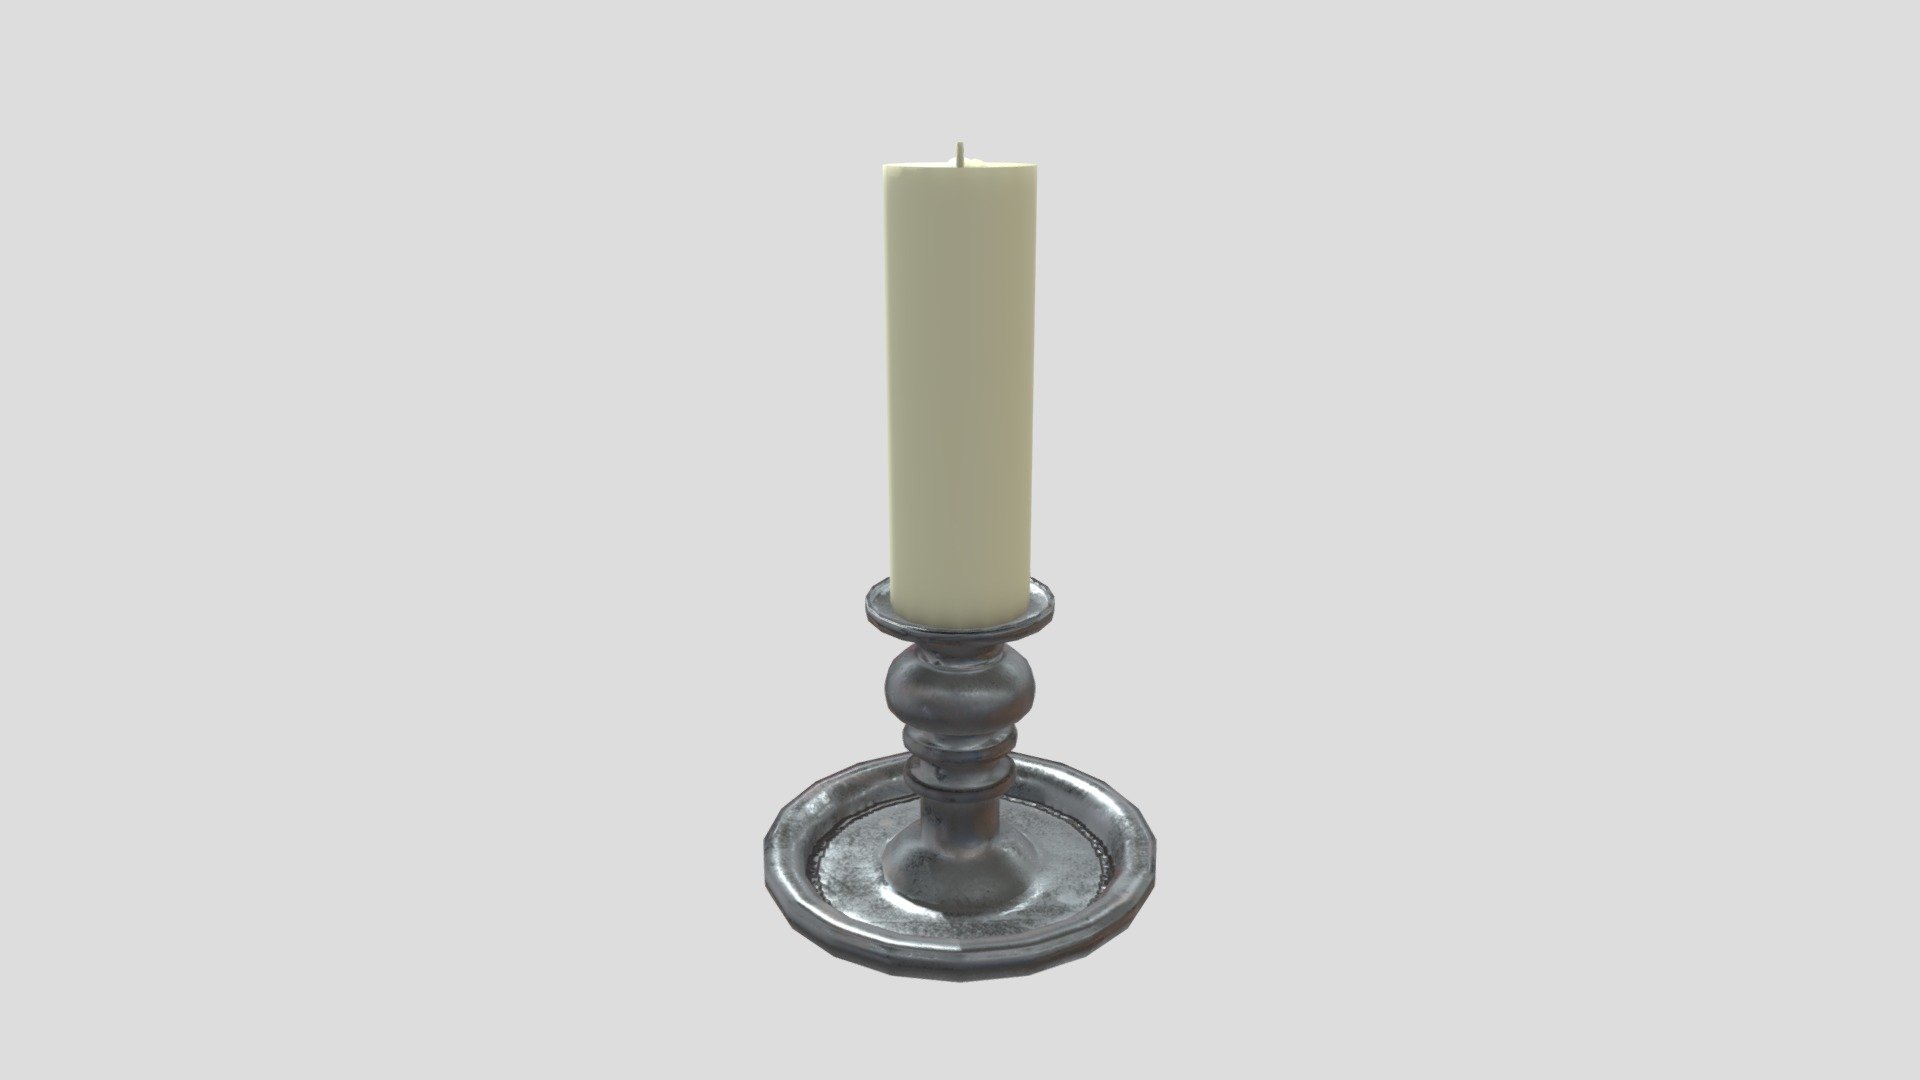 A candle asset I made for a university project 3d model